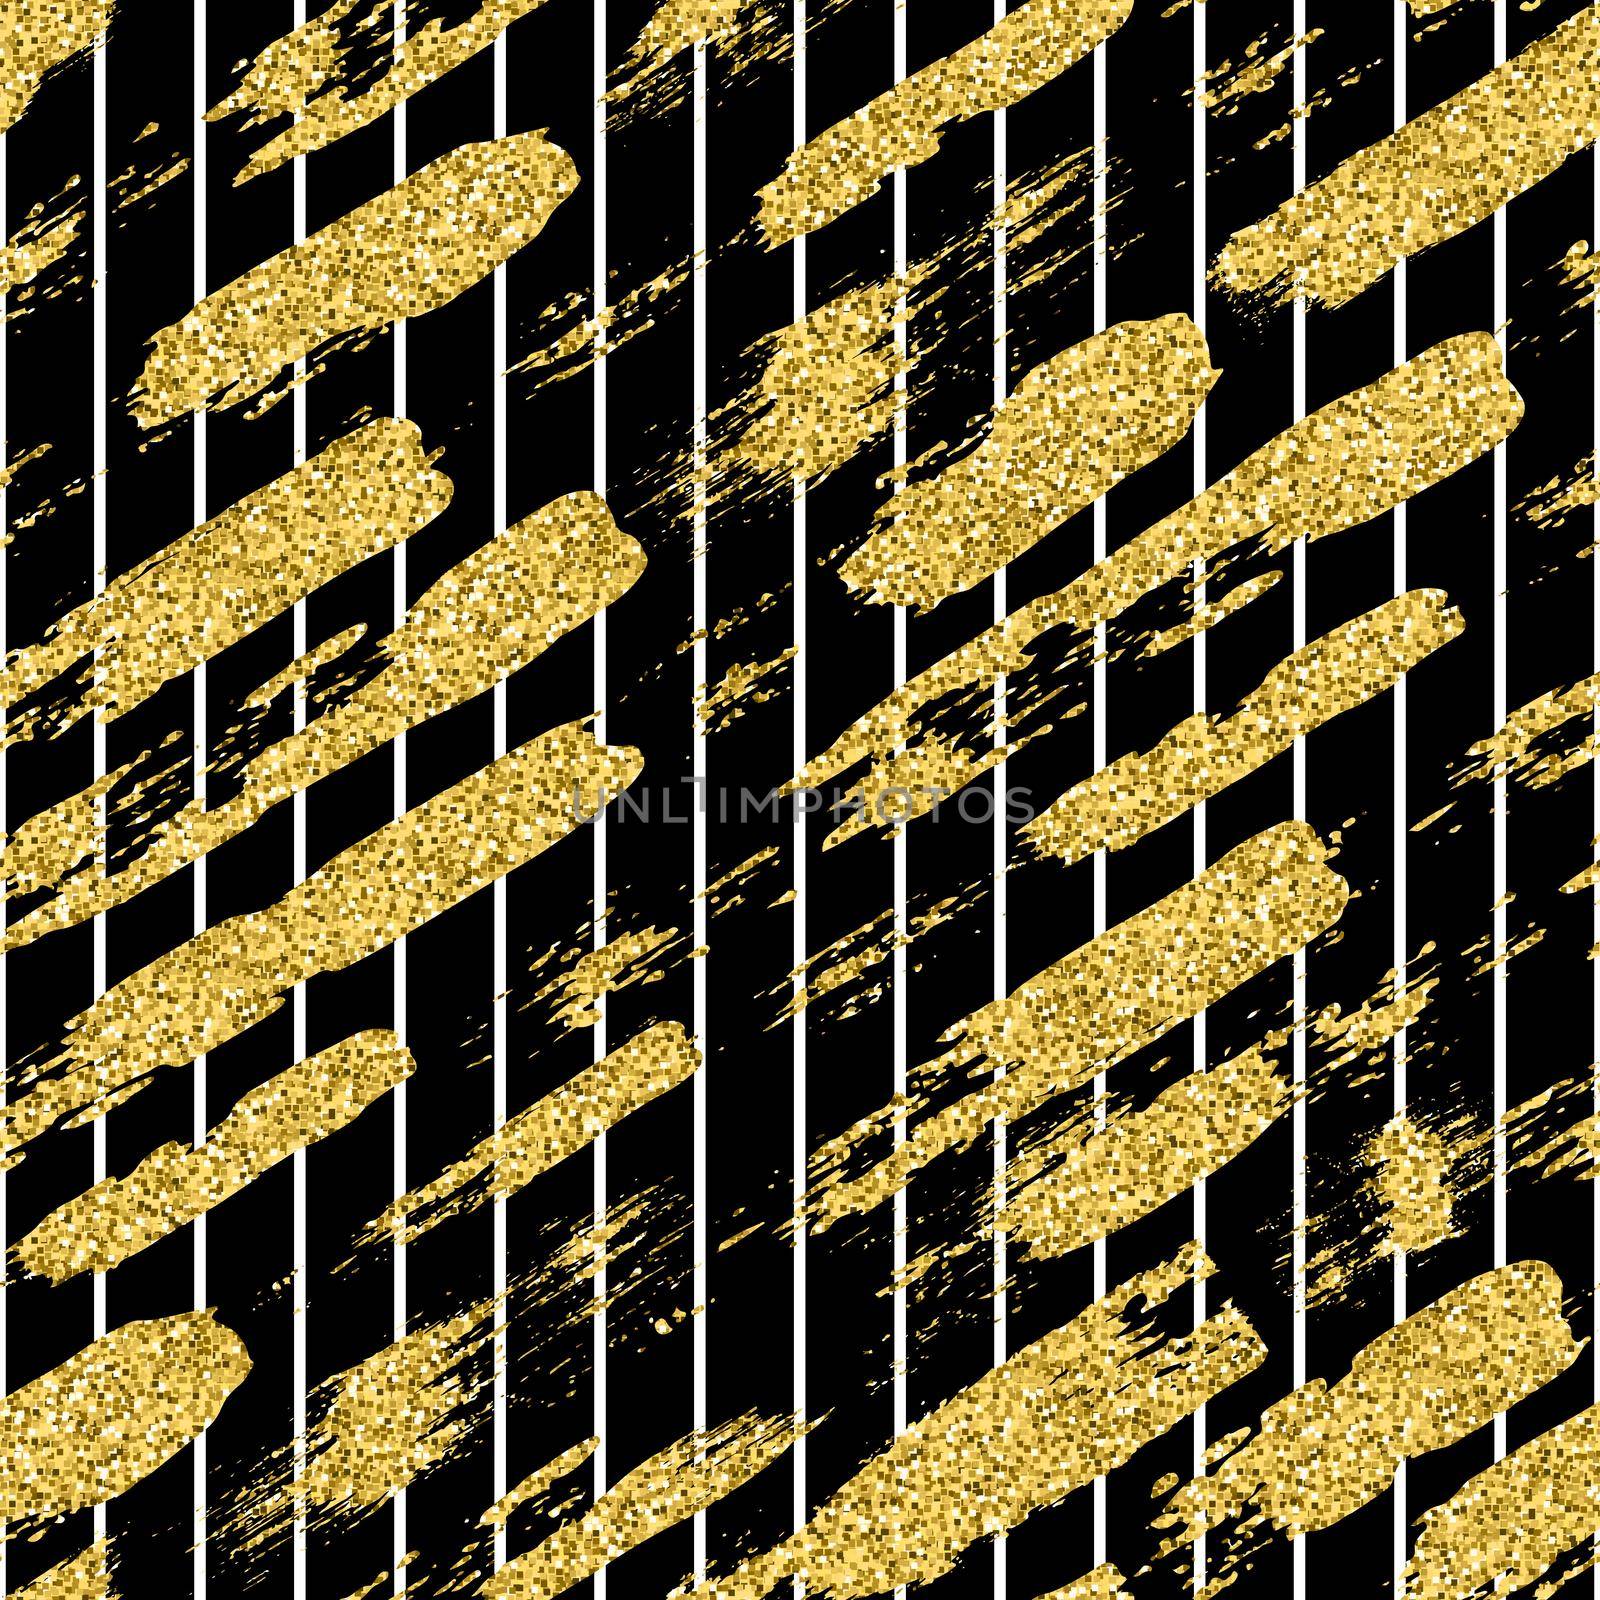 Modern seamless pattern with glitter brush stripes and strokes. Golden, white color on black background. Hand painted grange texture. Shiny spark elements. Fashion modern style. Repeat fabric print. by DesignAB